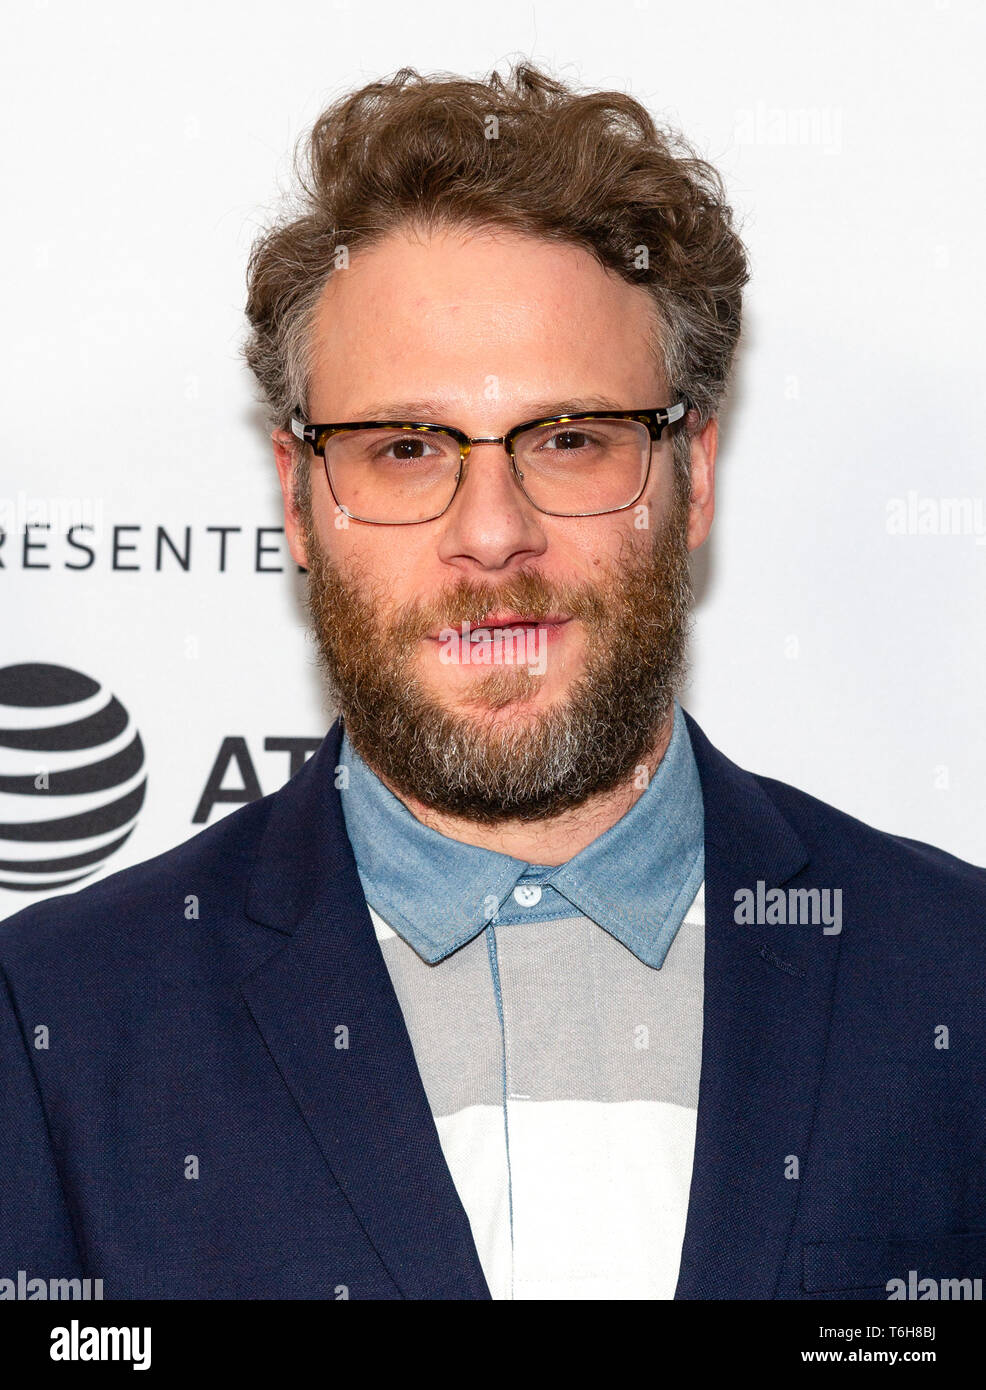 New York, NY - April 29, 2019: Seth Rogen attends the “The Boys” screening during the 2019 Tribeca Film Festival at SVA Theater Stock Photo